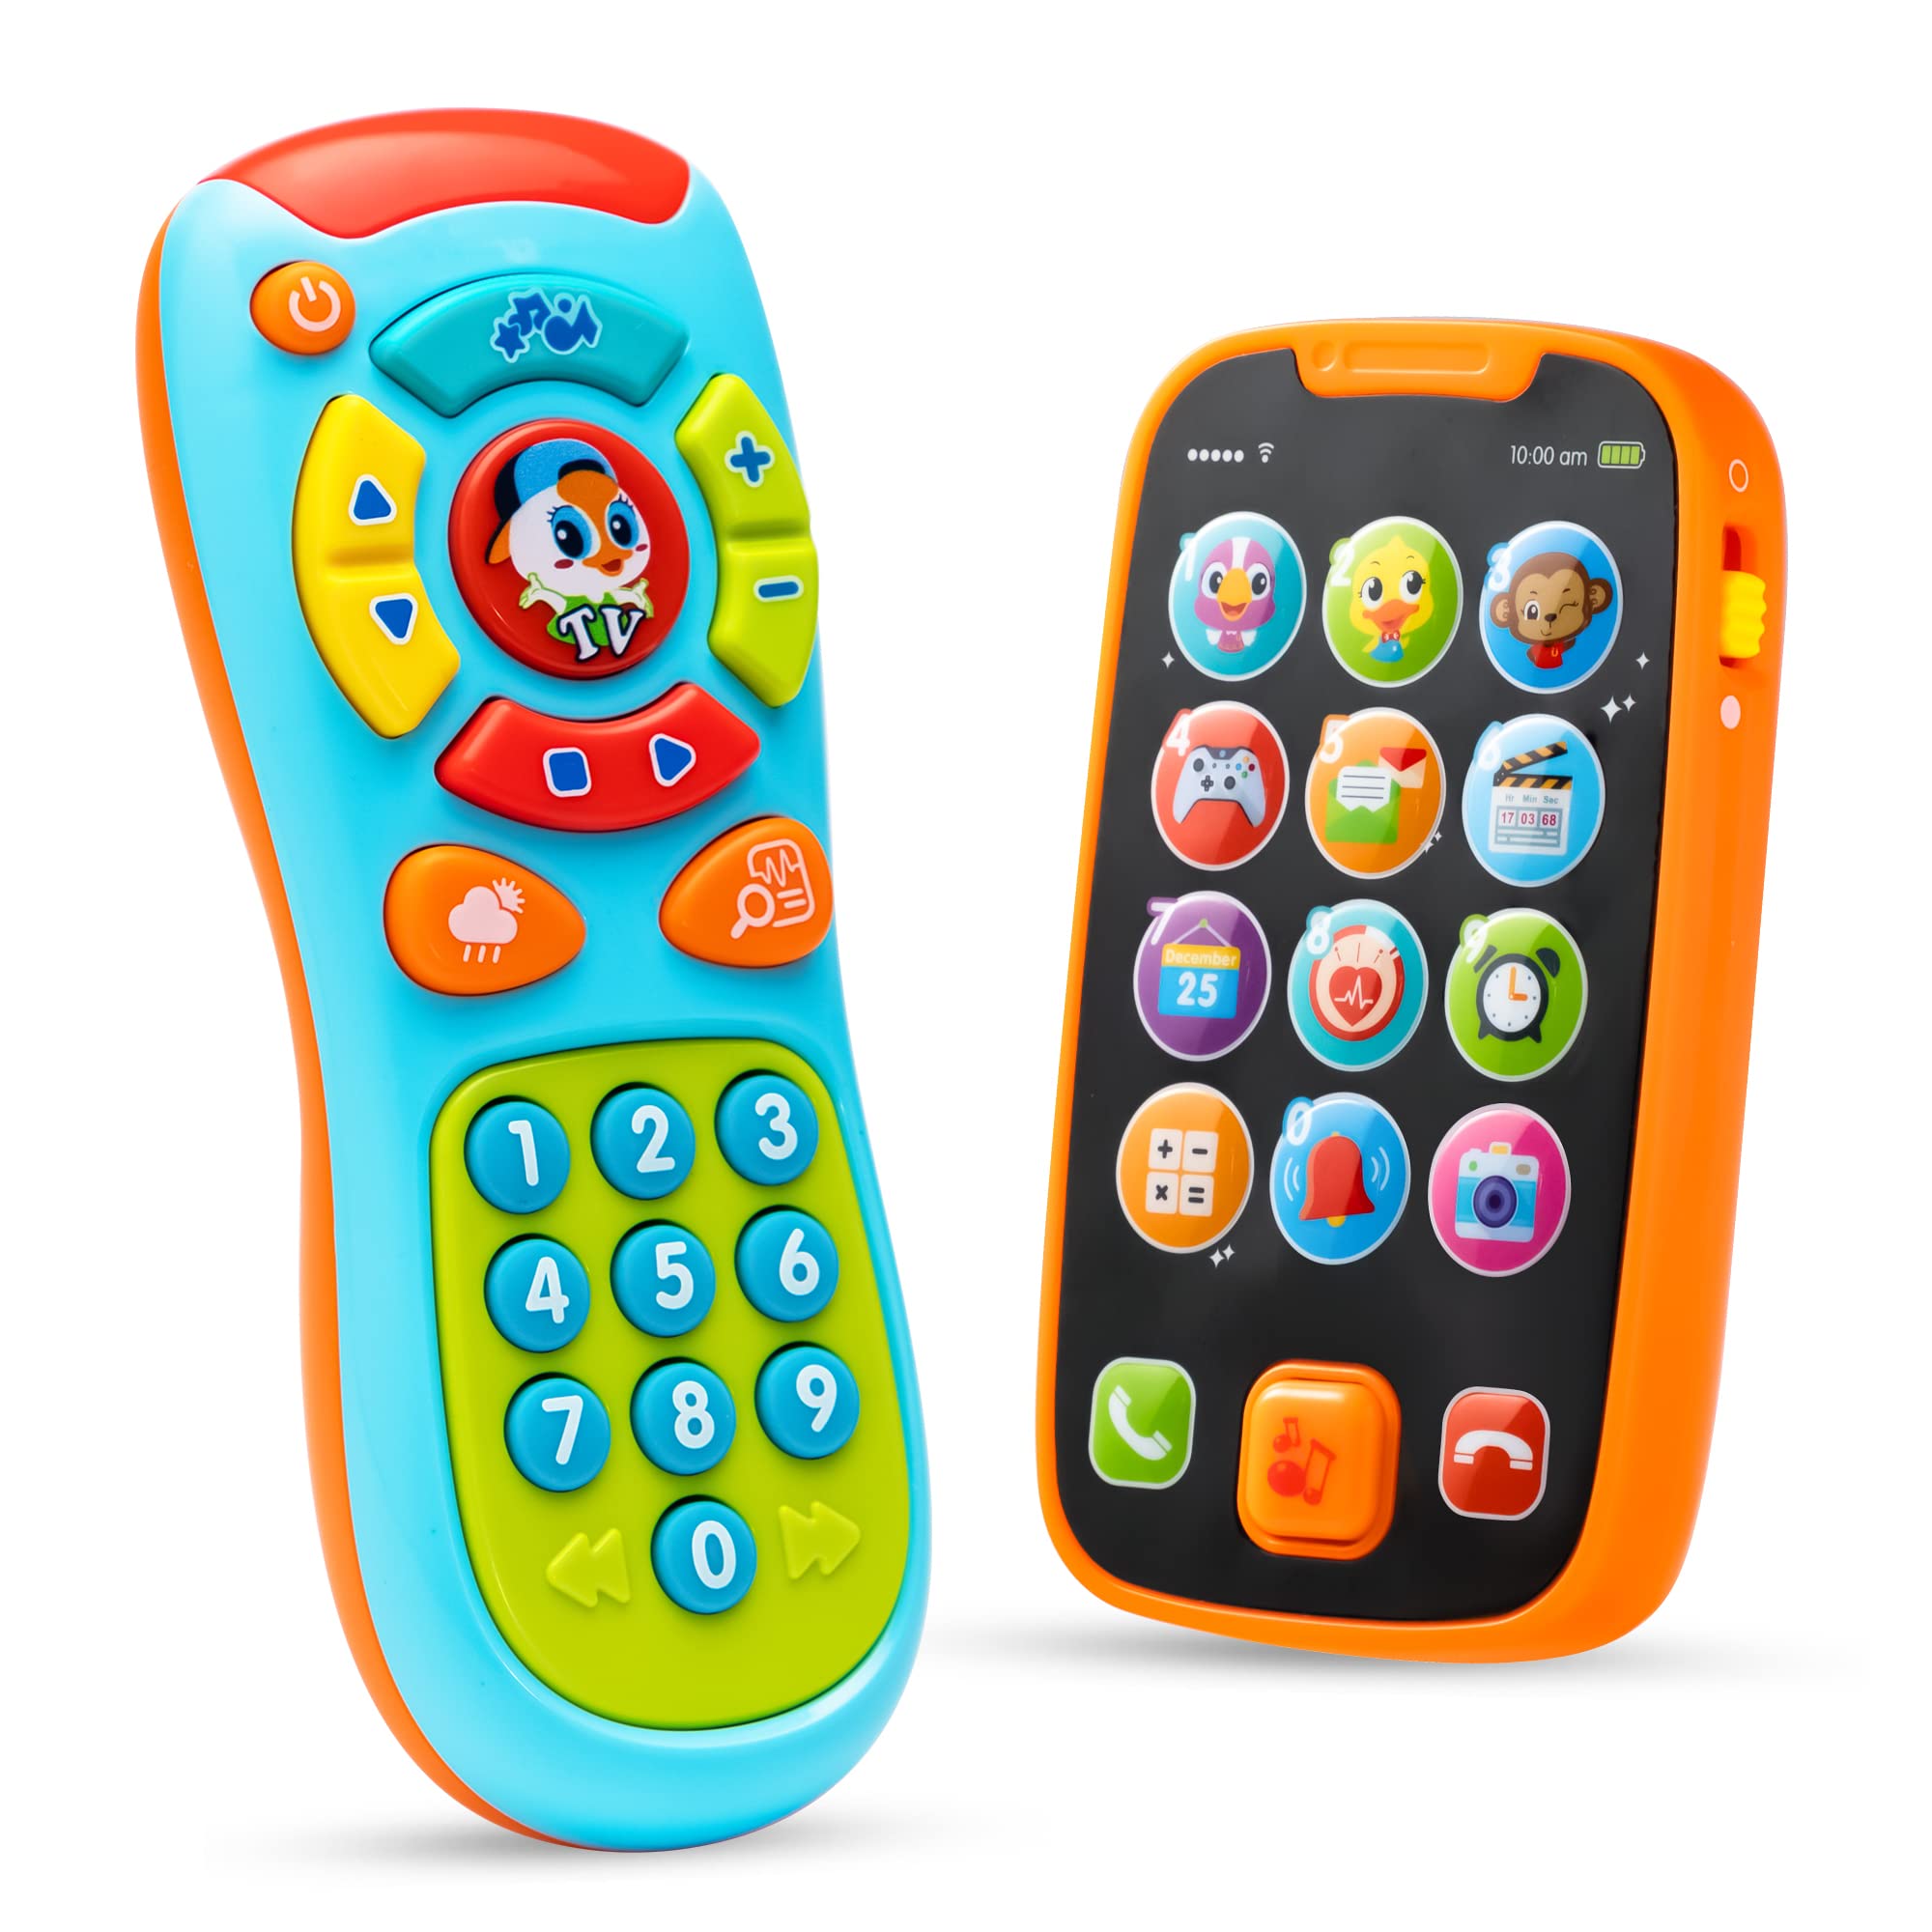 JOYIN My Learning Remote and Phone Bundle with Music, Fun Smartphone Toys for Baby, Infants, Kids, Boys or Girls Christmas Birthday Gifts, Holiday Stocking Stuffers Present